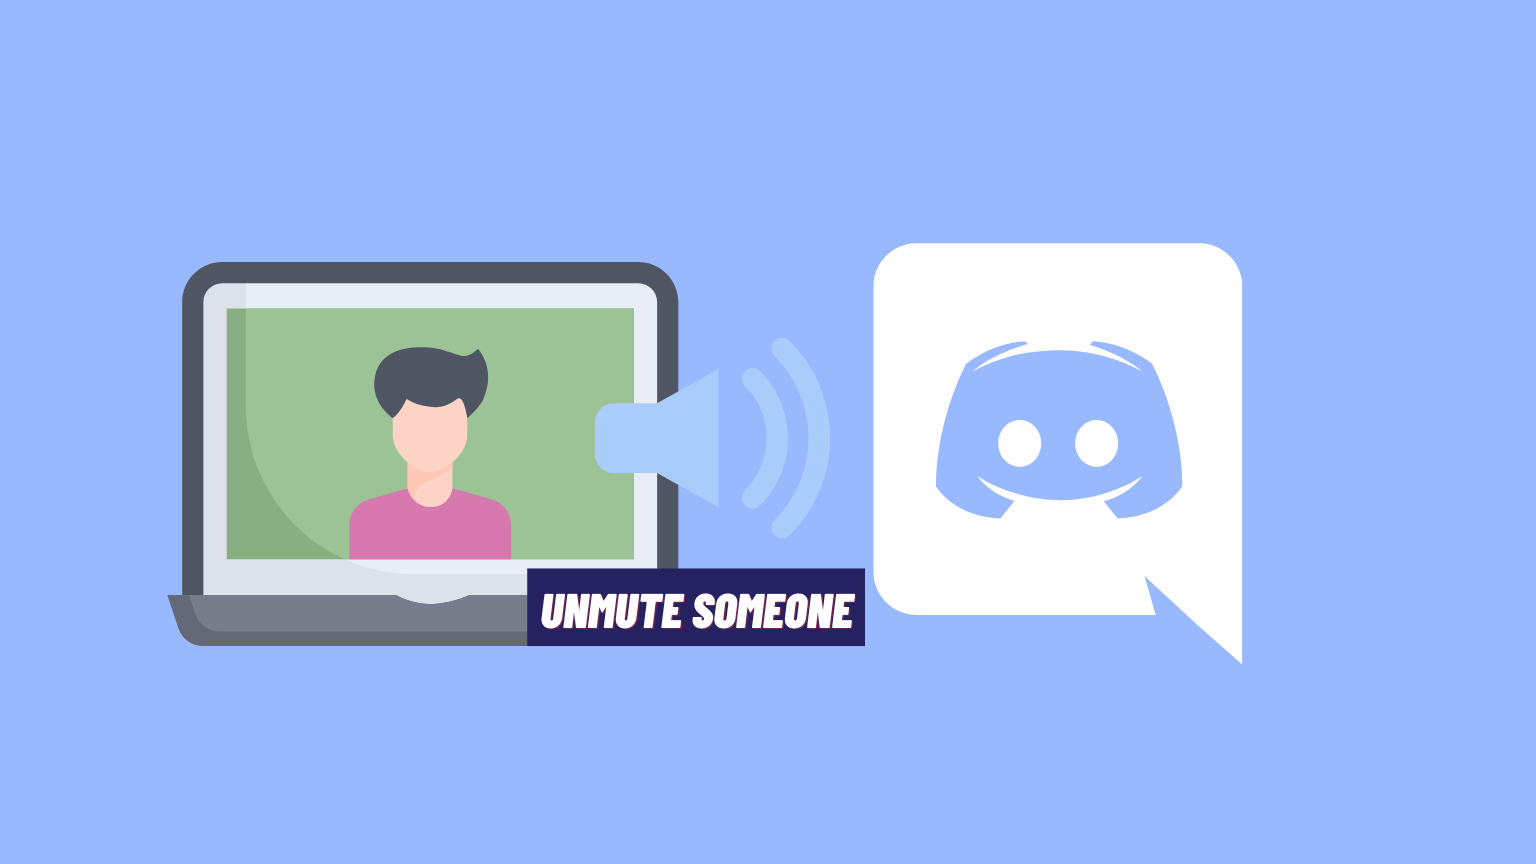 How to unmute someone on Discord